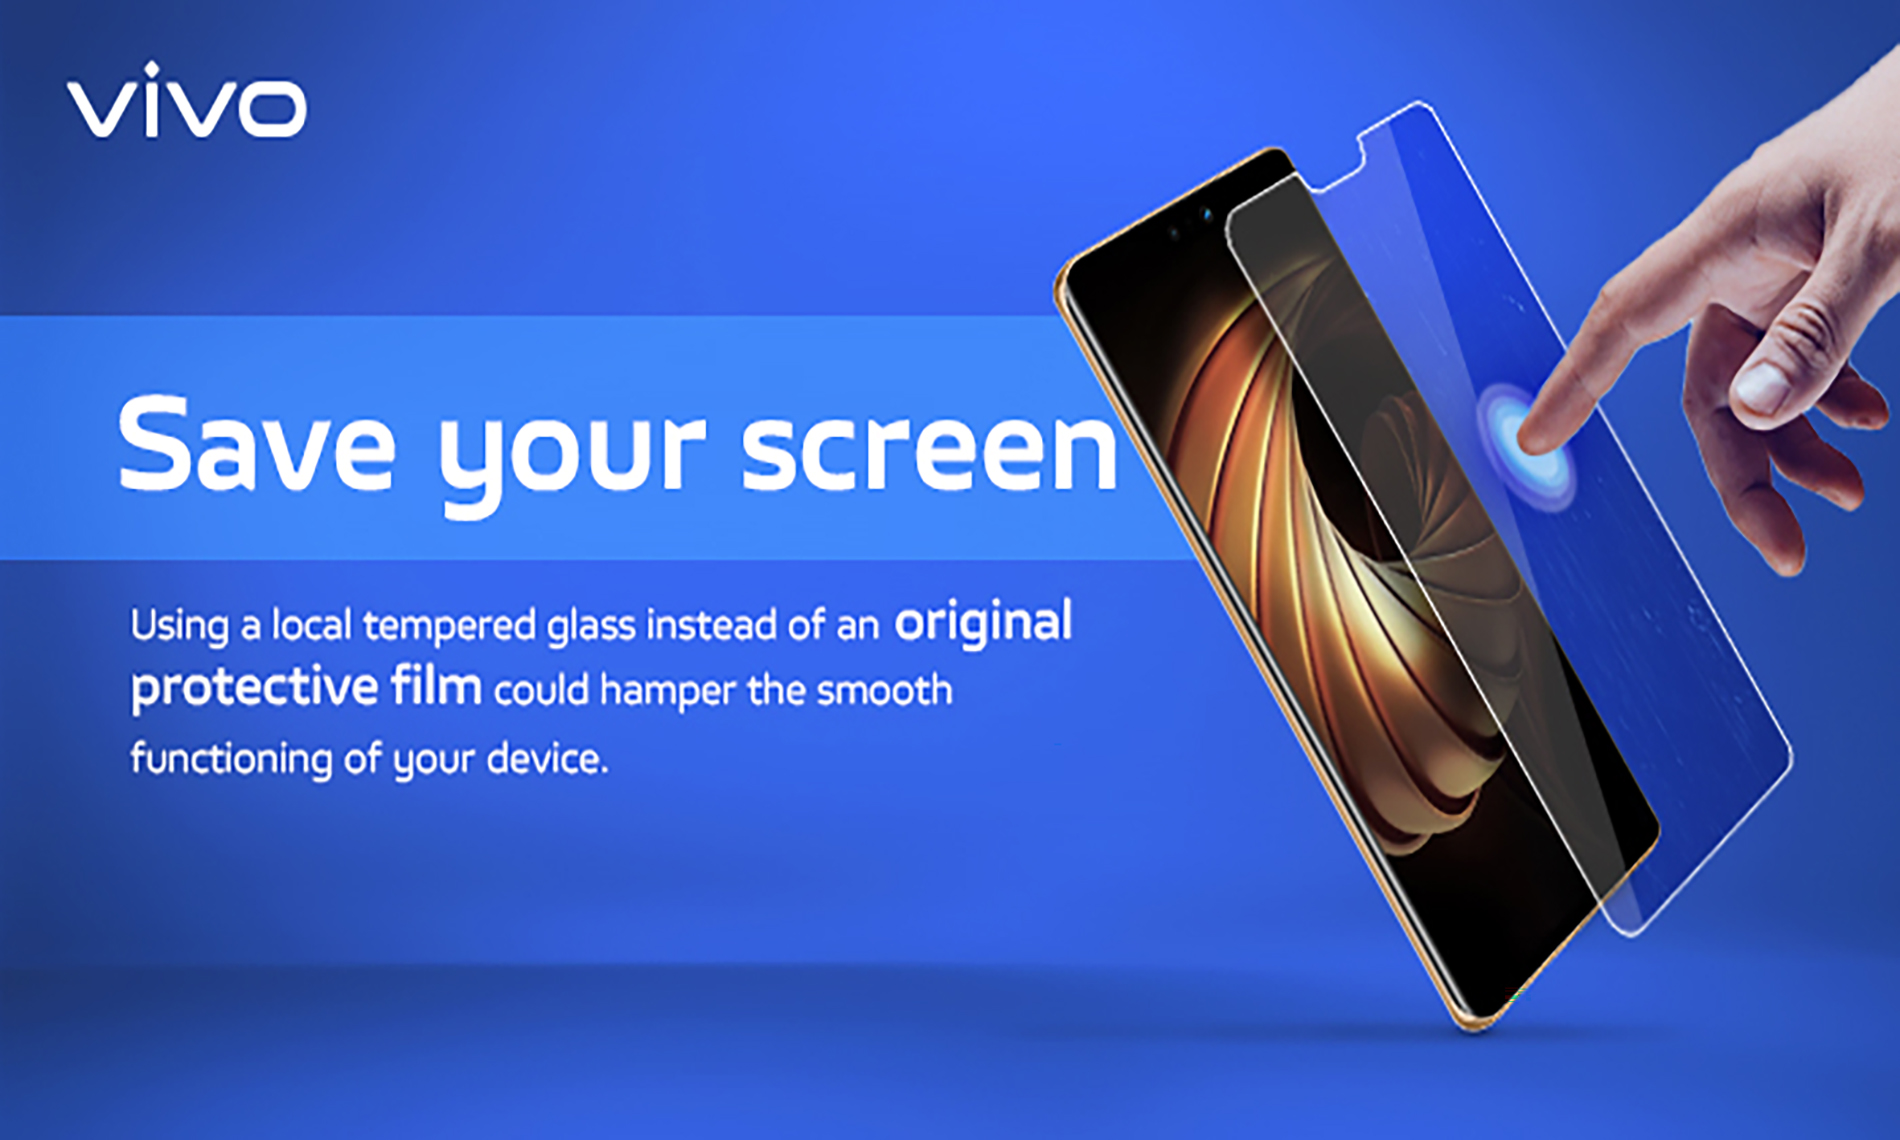 Save your screen from a local tempered glass and use an original protective film instead!